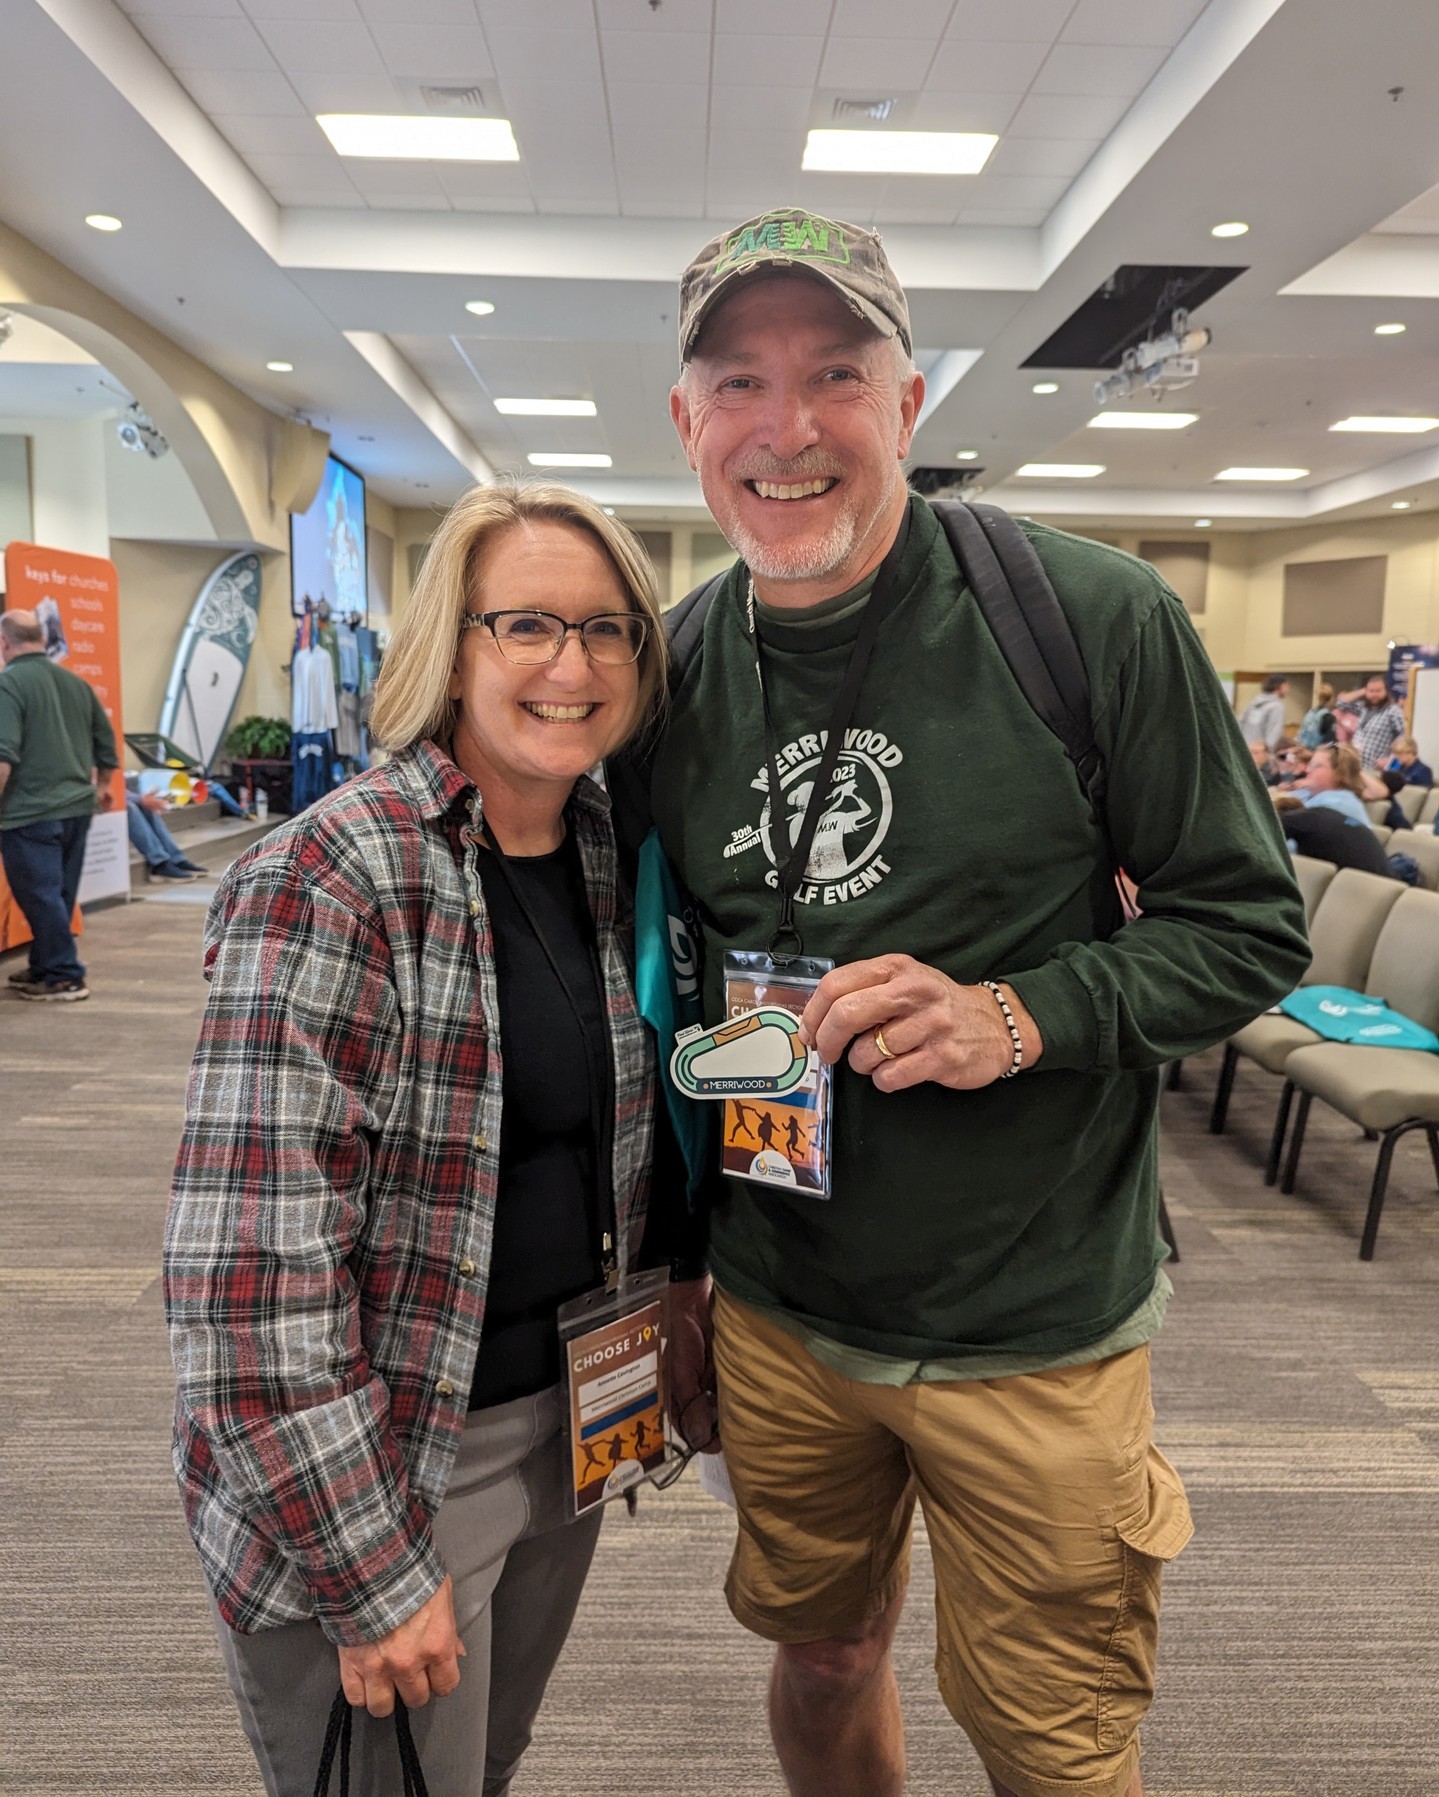 Spotted at the conference: An awesome moment as a couple from Camp Merriwood discovers their camp sticker on the table! 🏕️

#StickersAndMore
#ElevateYourBrand